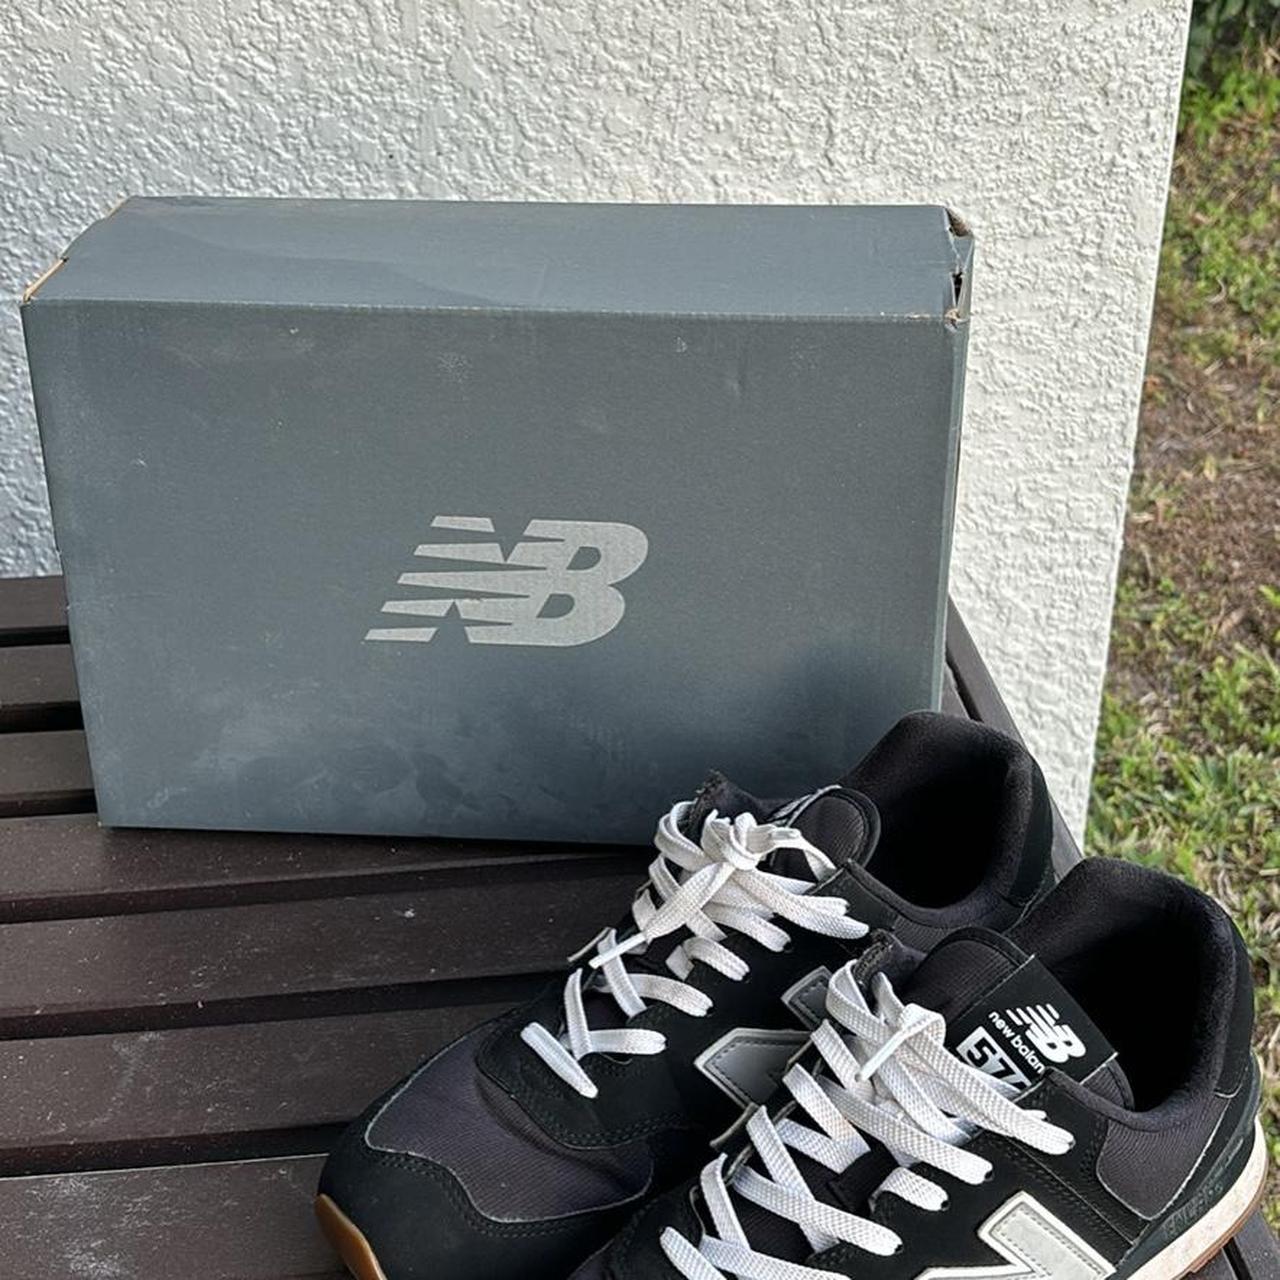 New Balance Men's Black and Grey Trainers